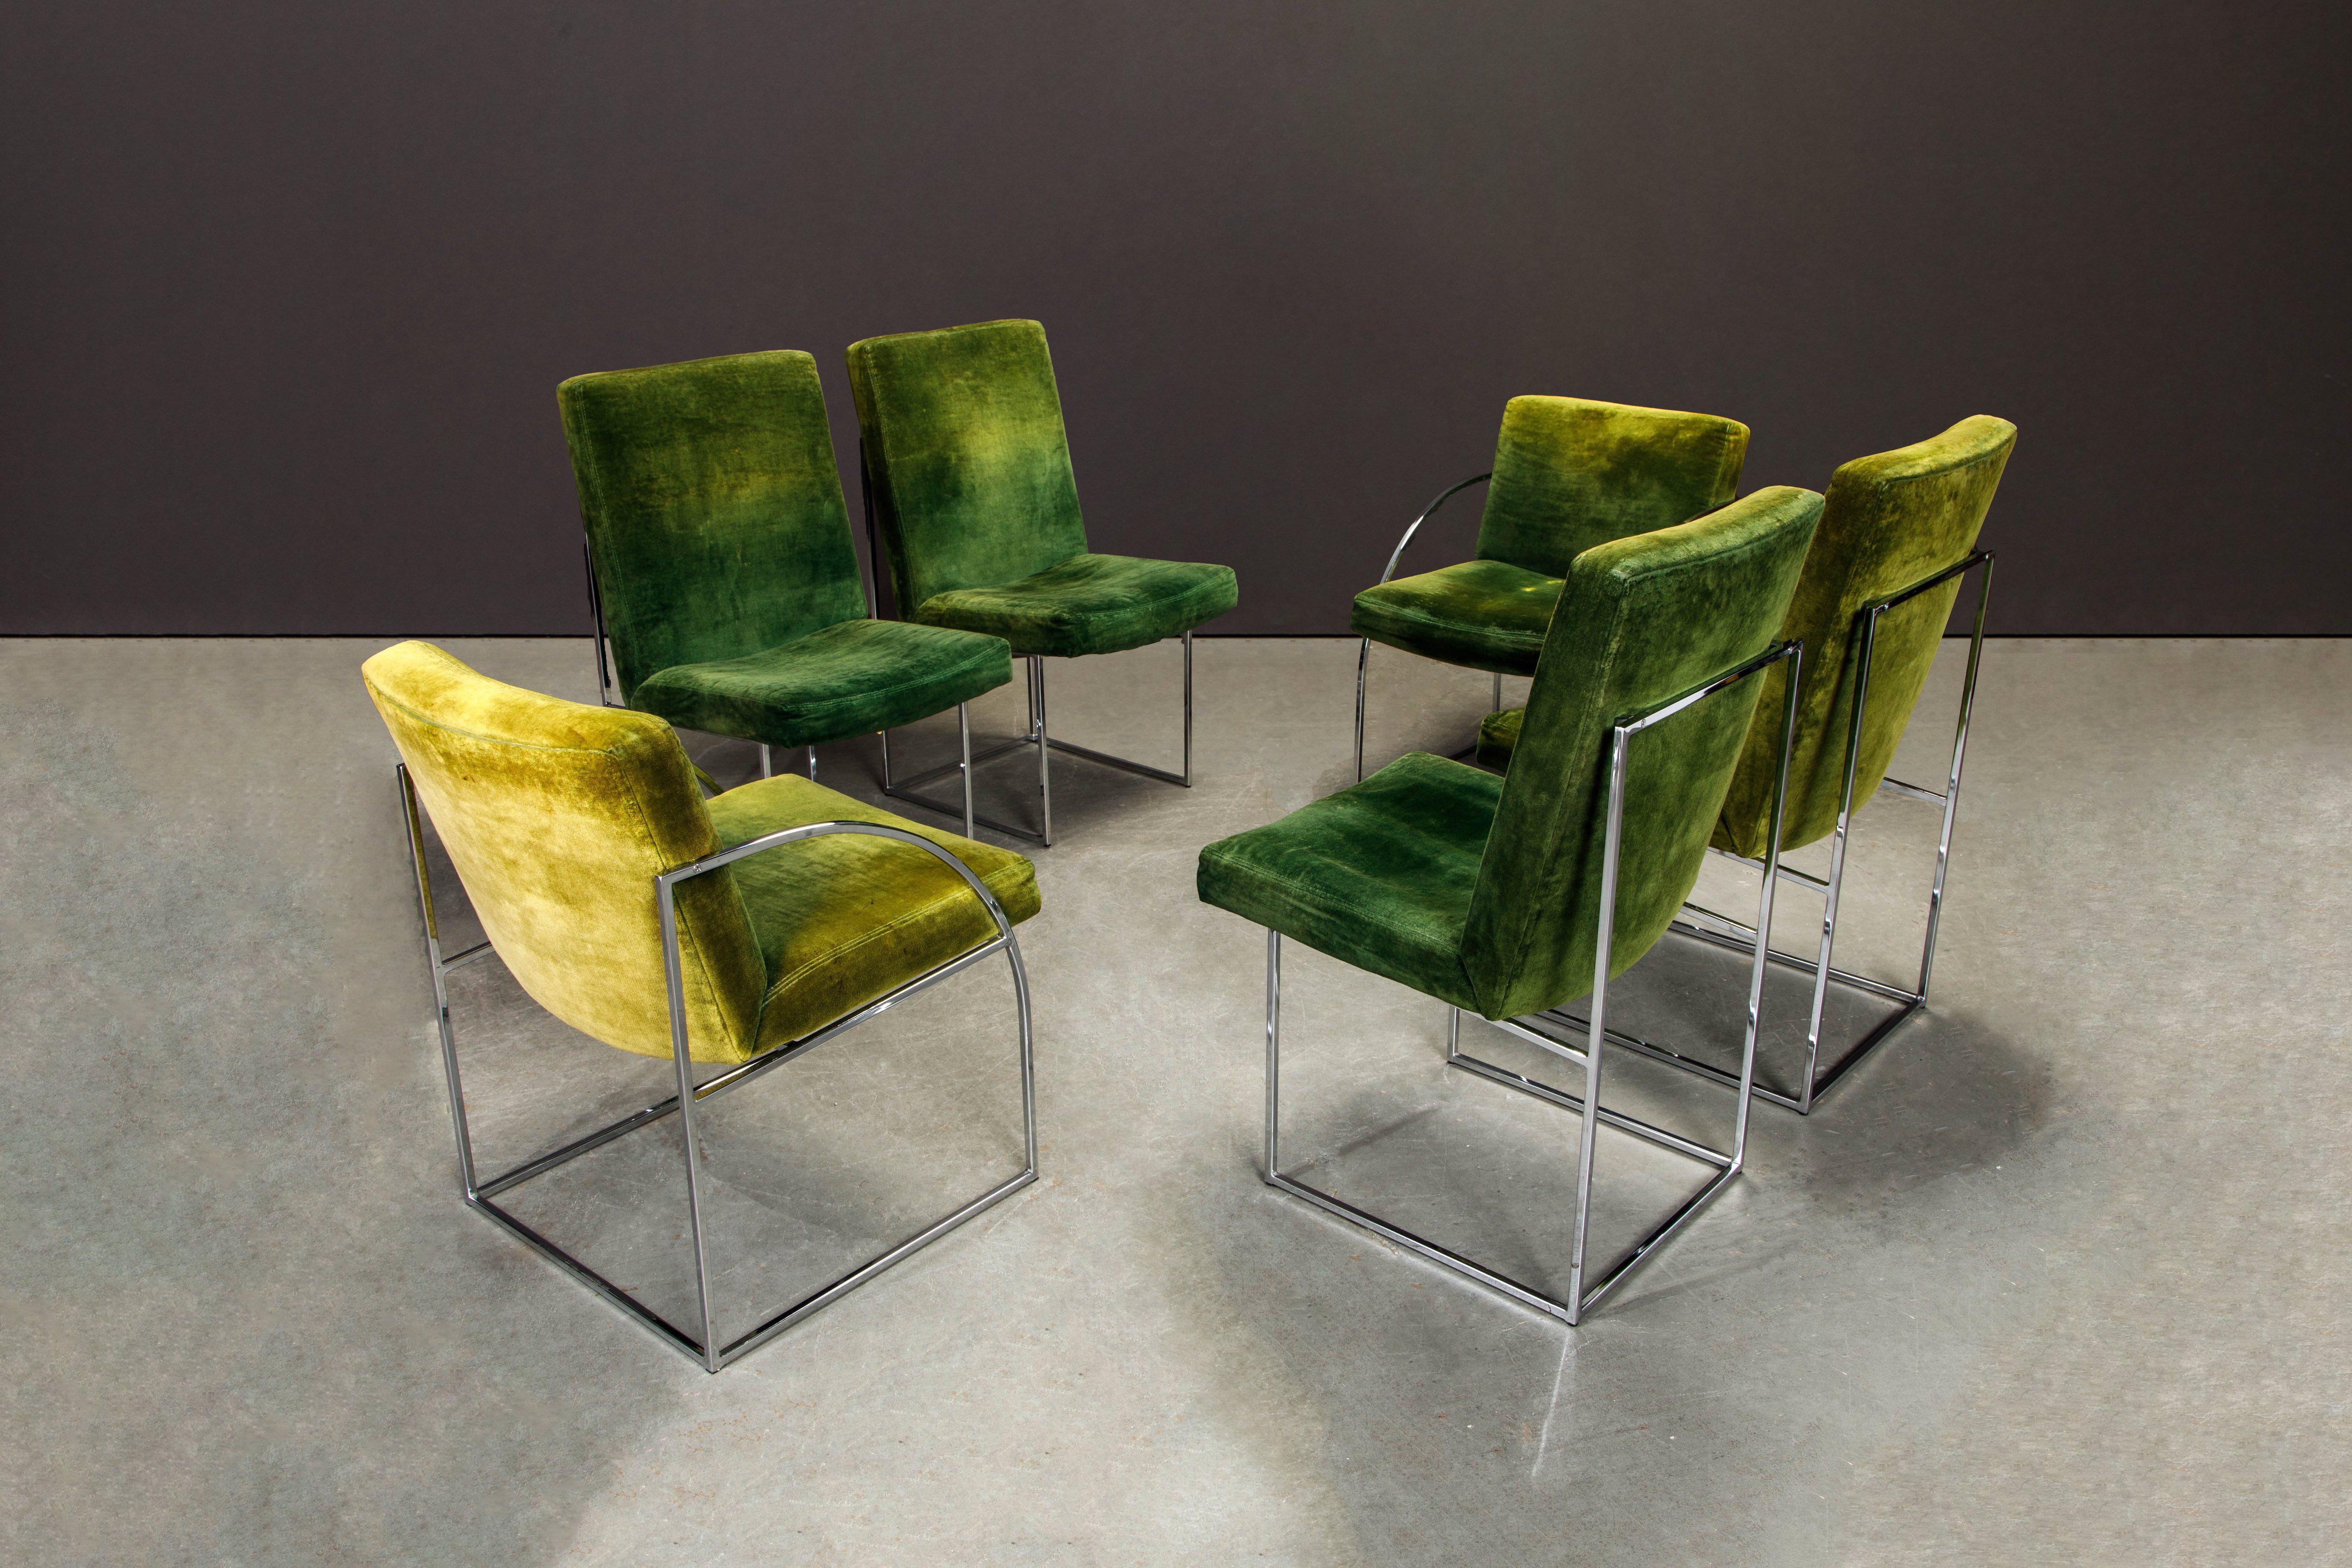 Modern Chrome Dining Chairs by Milo Baughman for Thayer Coggin, Signed and Dated 1975